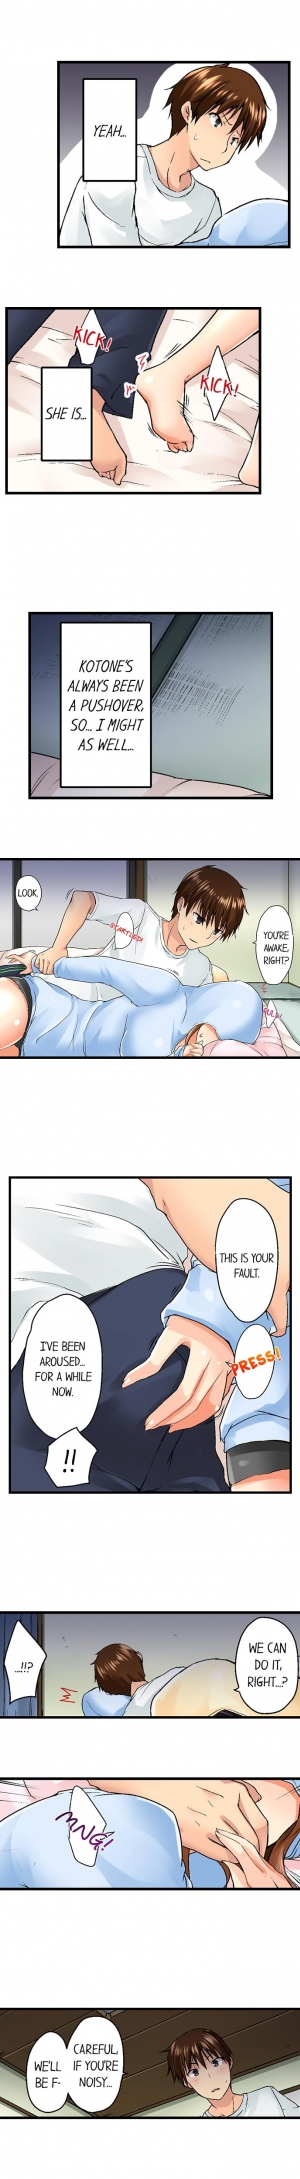 [Kaiduka] My Brother's Slipped Inside Me in The Bathtub (Ongoing) - Page 34